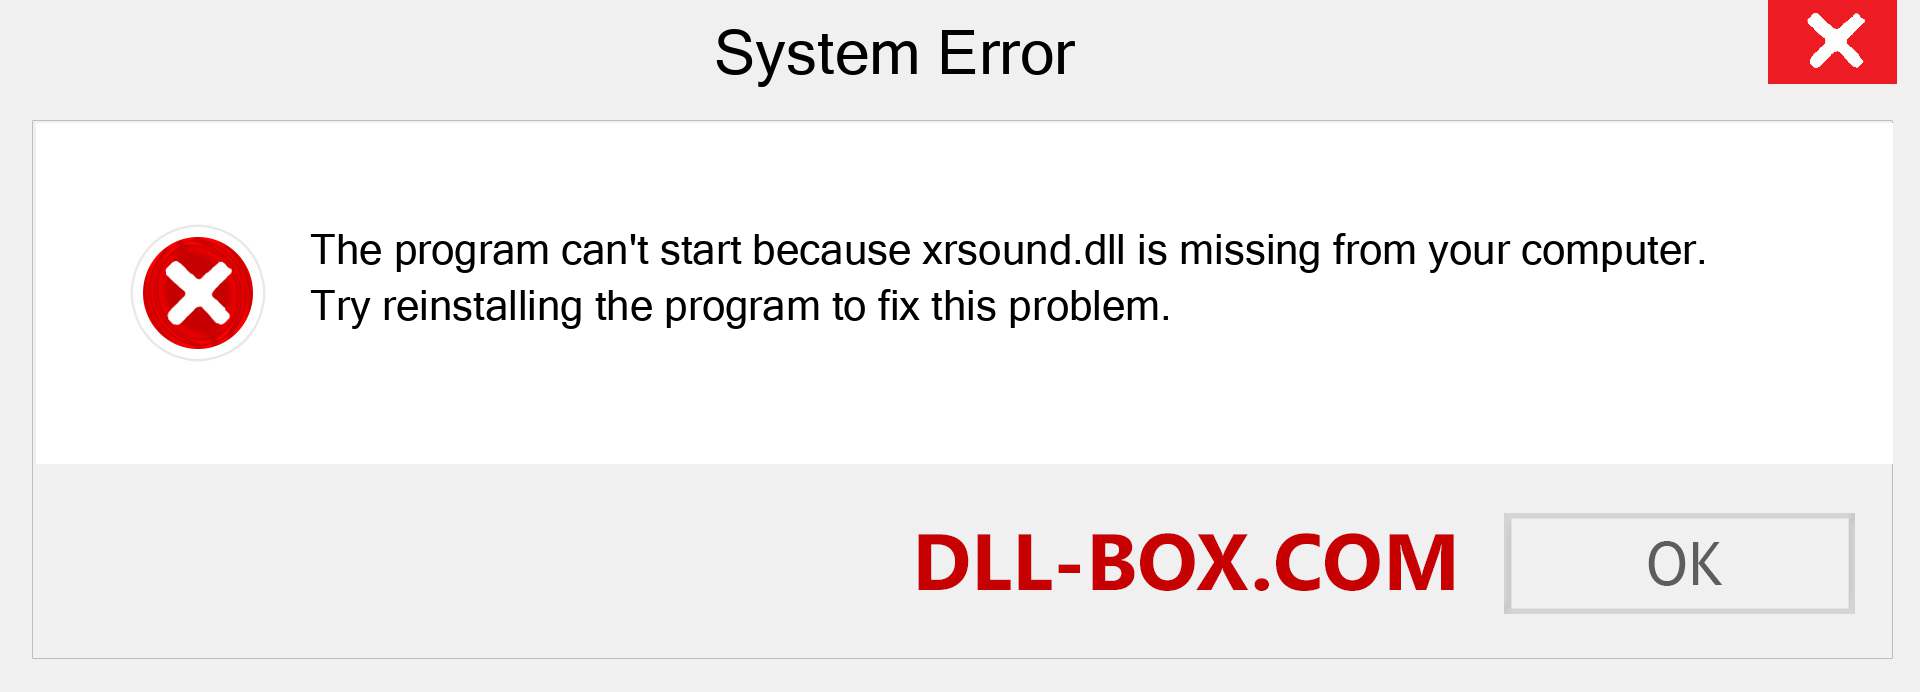  xrsound.dll file is missing?. Download for Windows 7, 8, 10 - Fix  xrsound dll Missing Error on Windows, photos, images